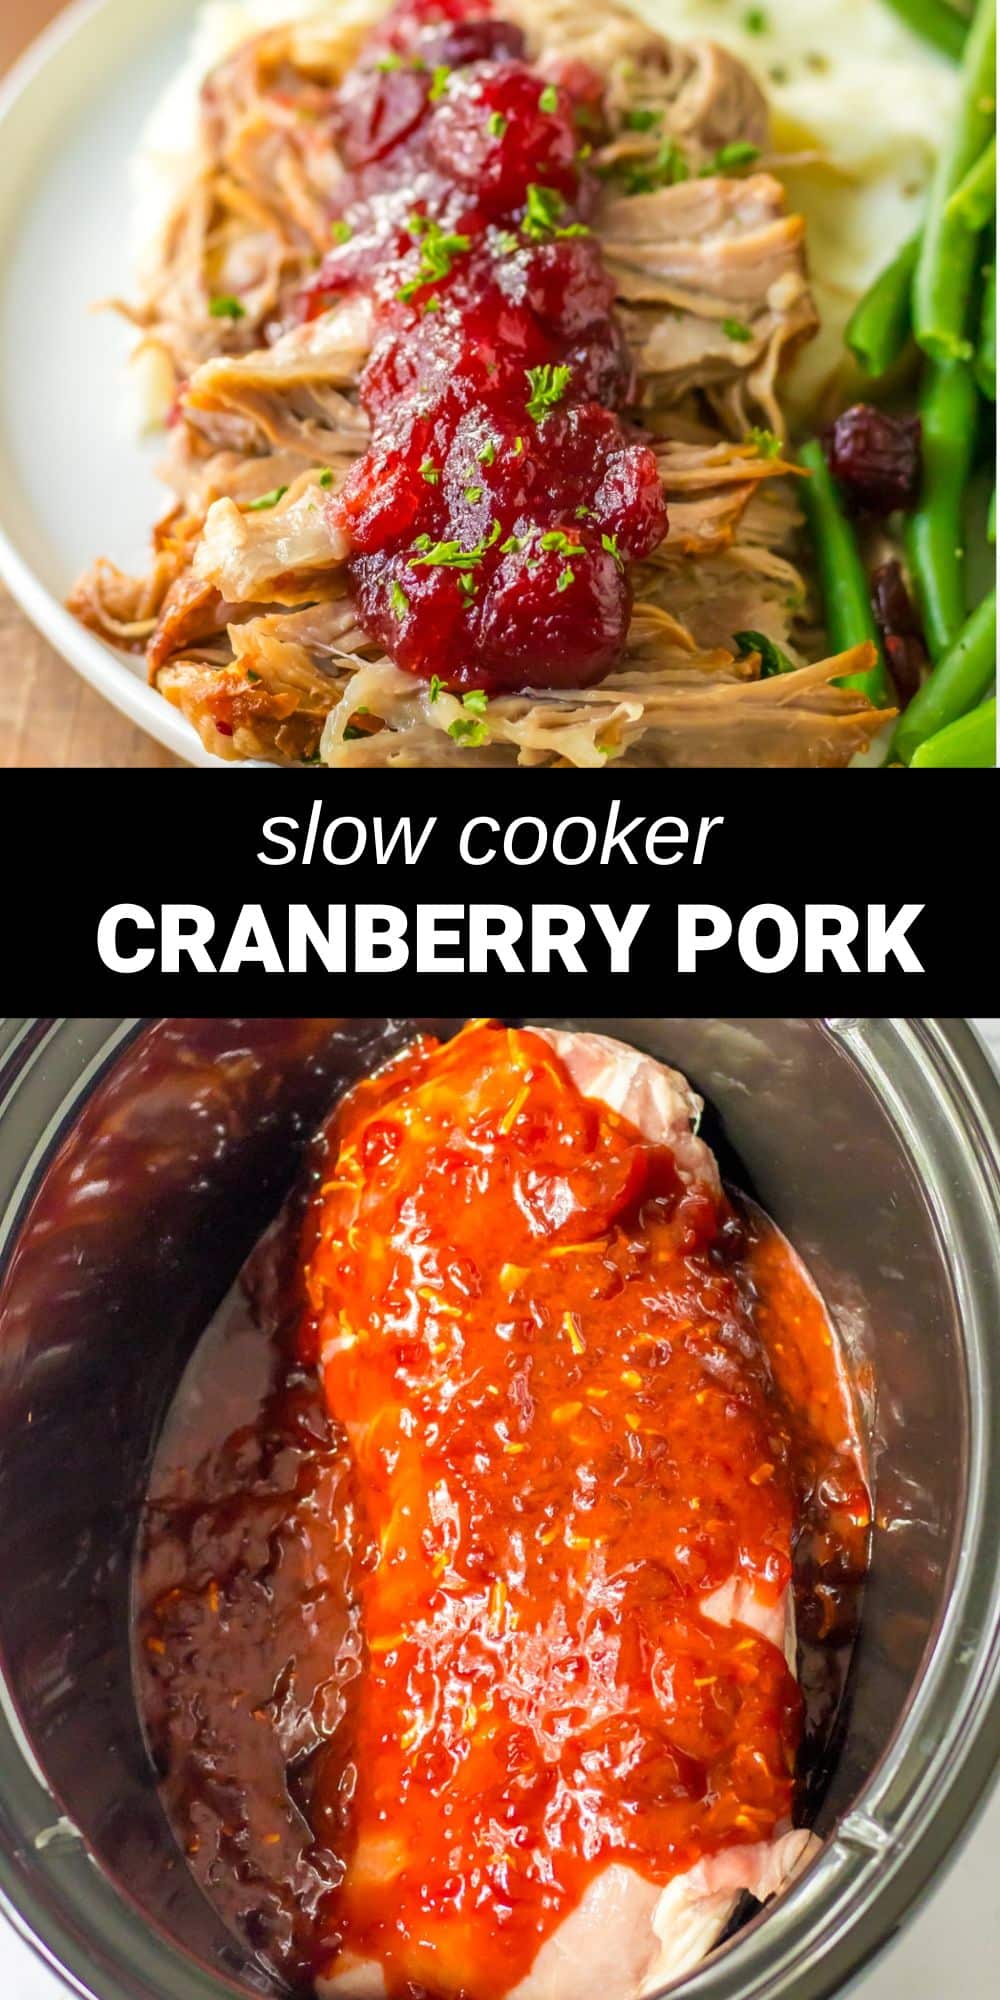 So tender and juicy, this Slow Cooker Cranberry Pork is full of sweet, savory fall flavors. With only 5 minutes of prep time, this no fuss main course is perfect for a special holiday meal or dinner any night of the week. 